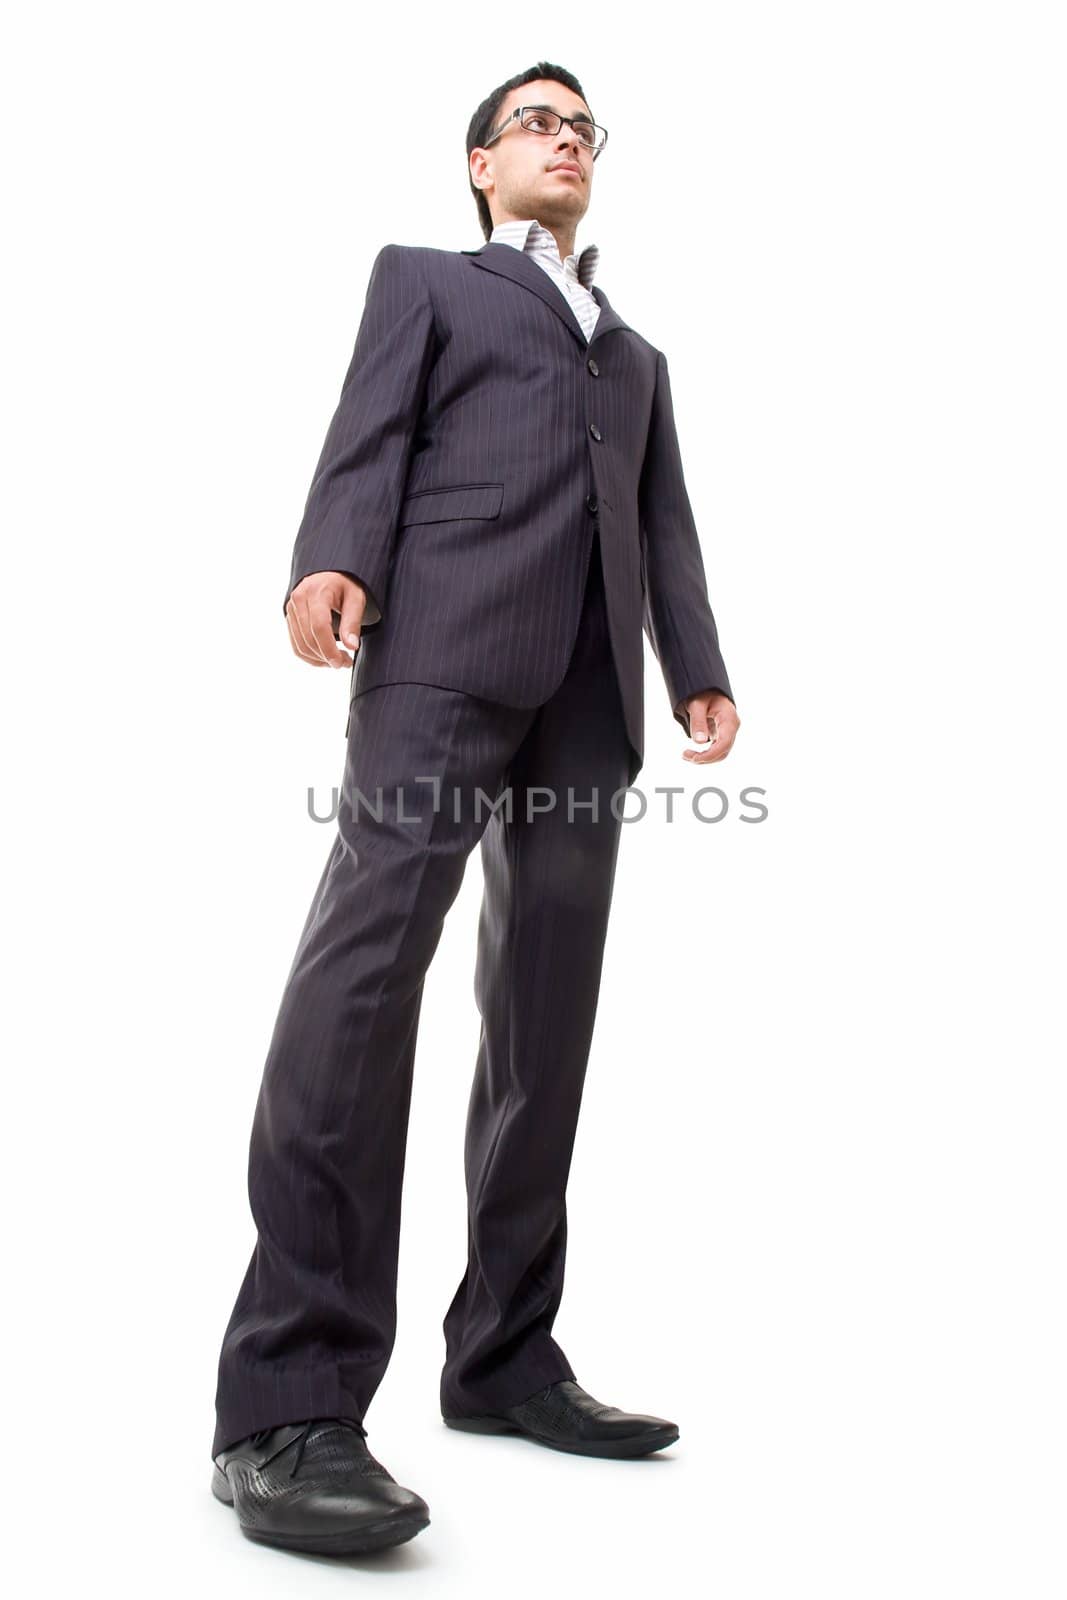 Young business man isolated on white background.